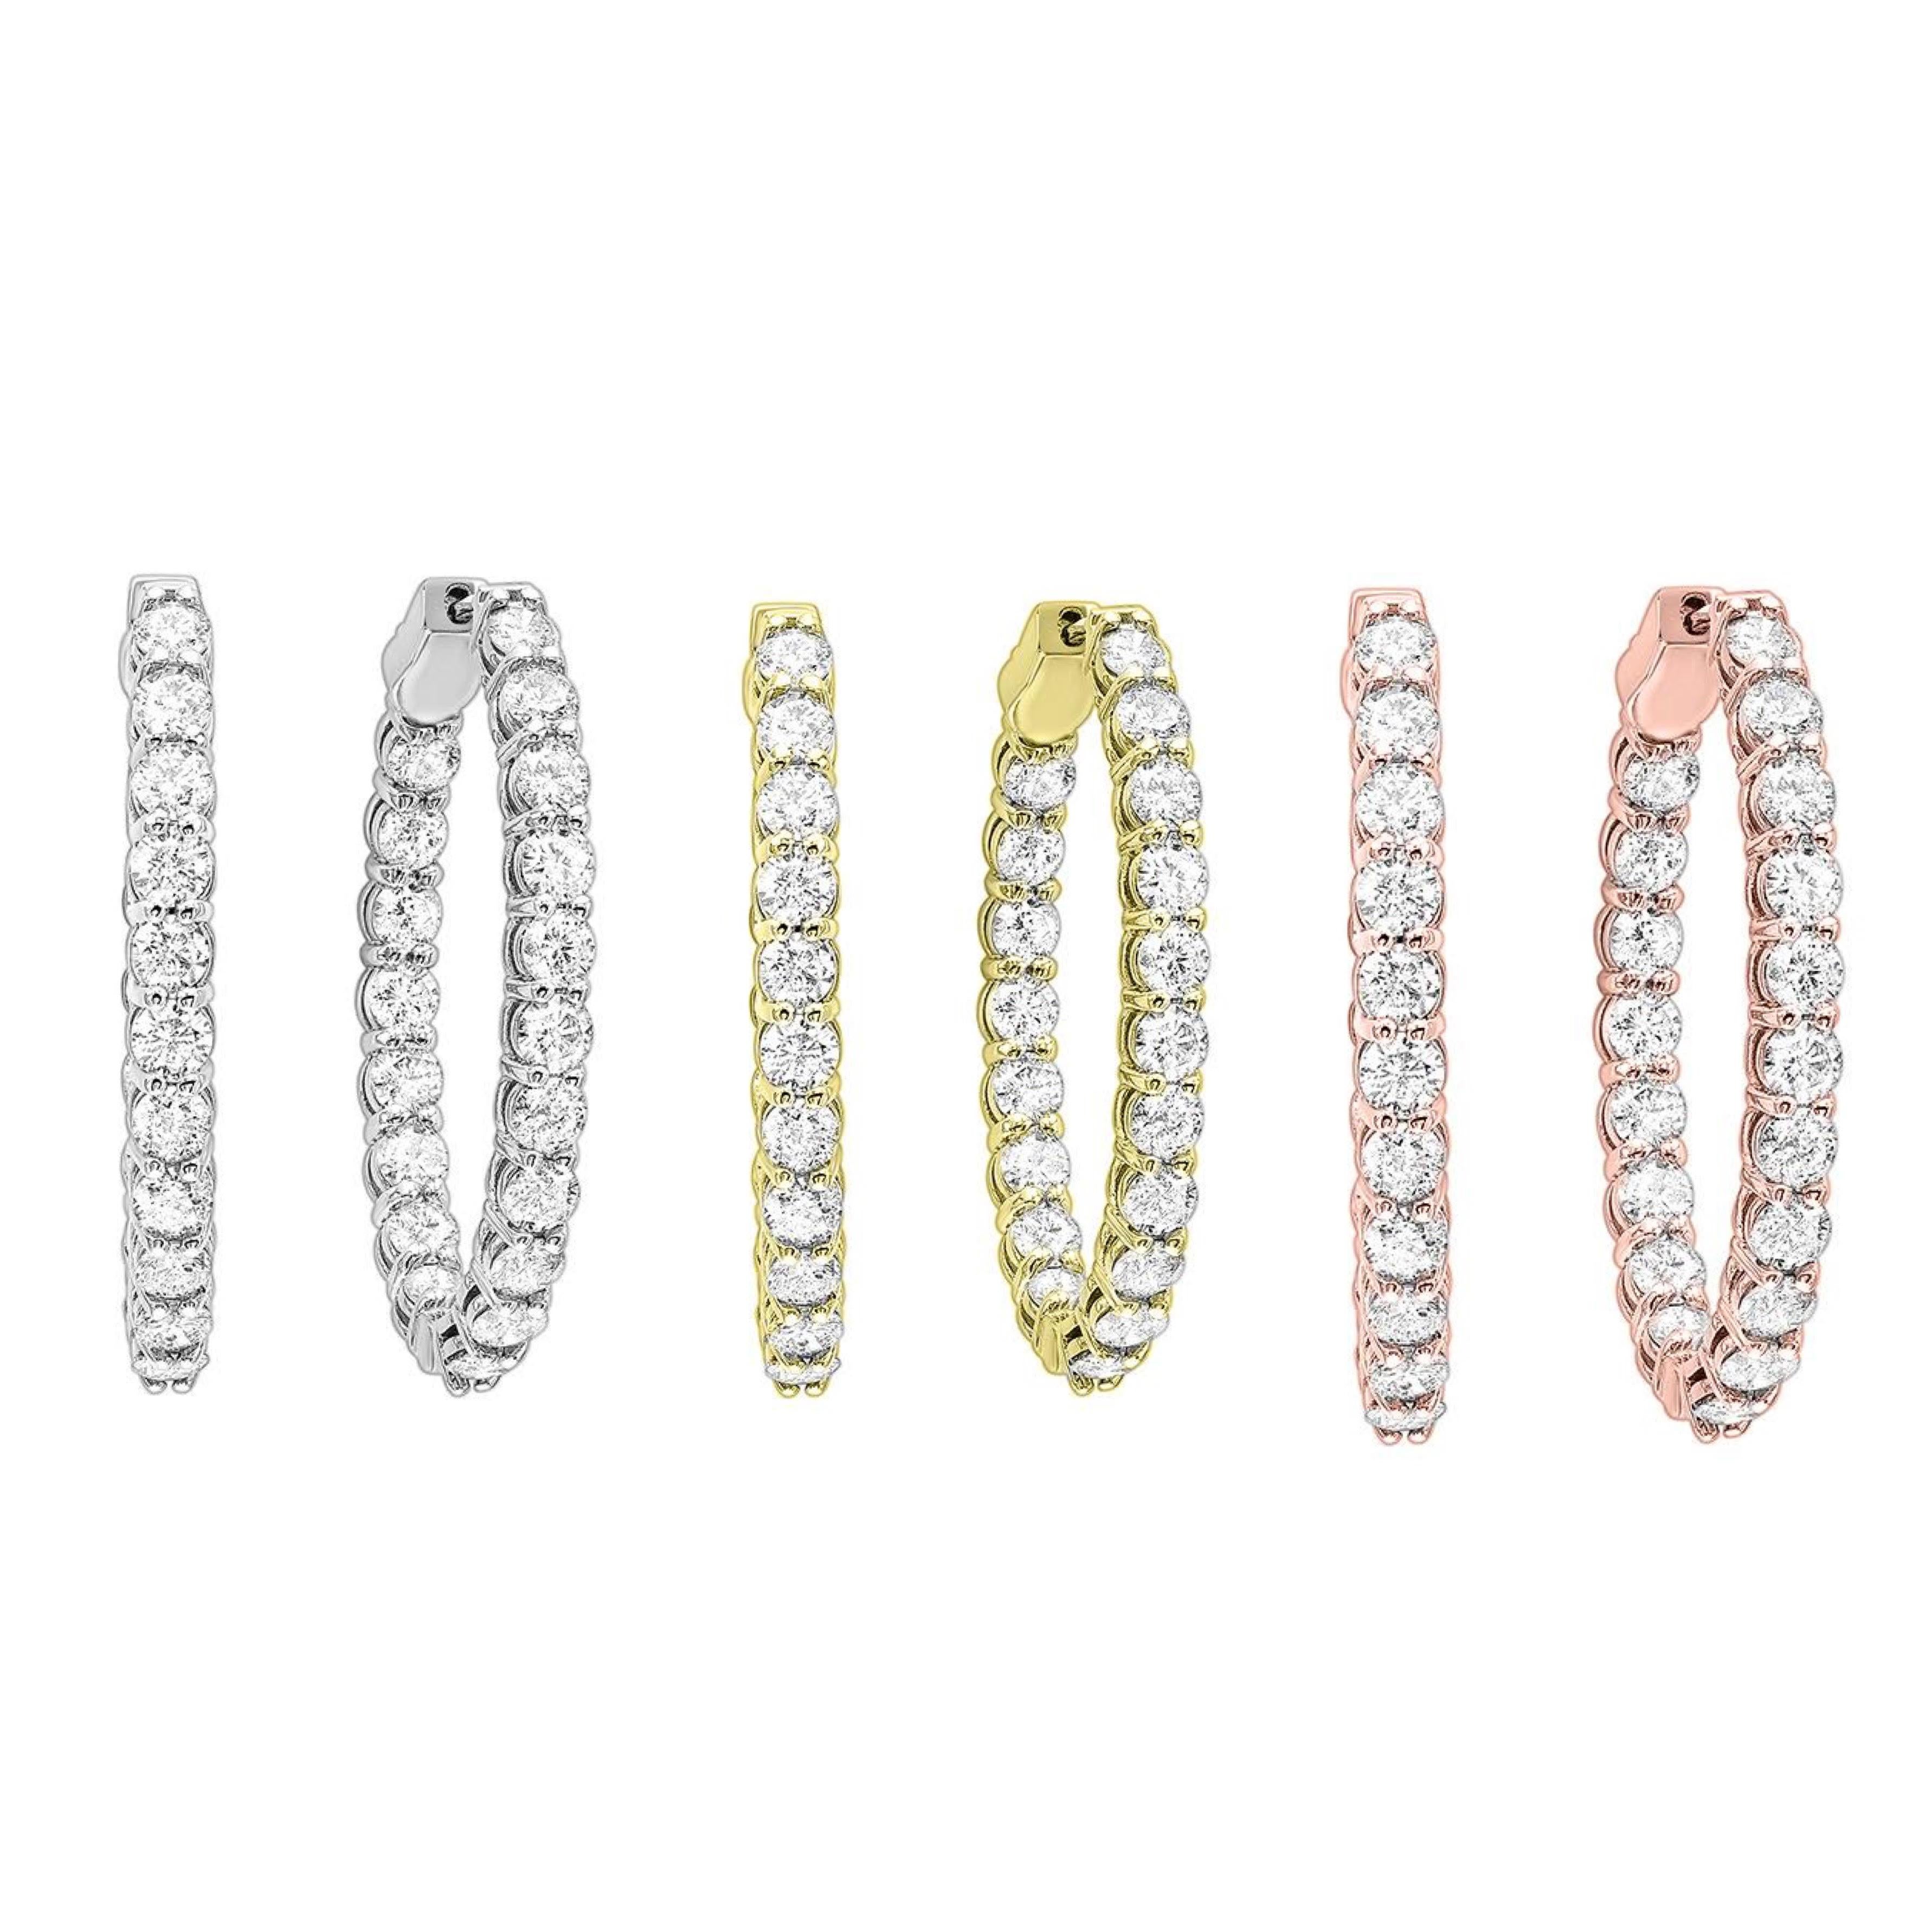 Nothing says luxury like an incredible pair of diamond hoop earrings. These stunning brightly polished 14 karat yellow gold inside out oval-shaped hoop earrings feature a total of 46 round brilliant cut diamonds totaling 2.00 carats are prong set on